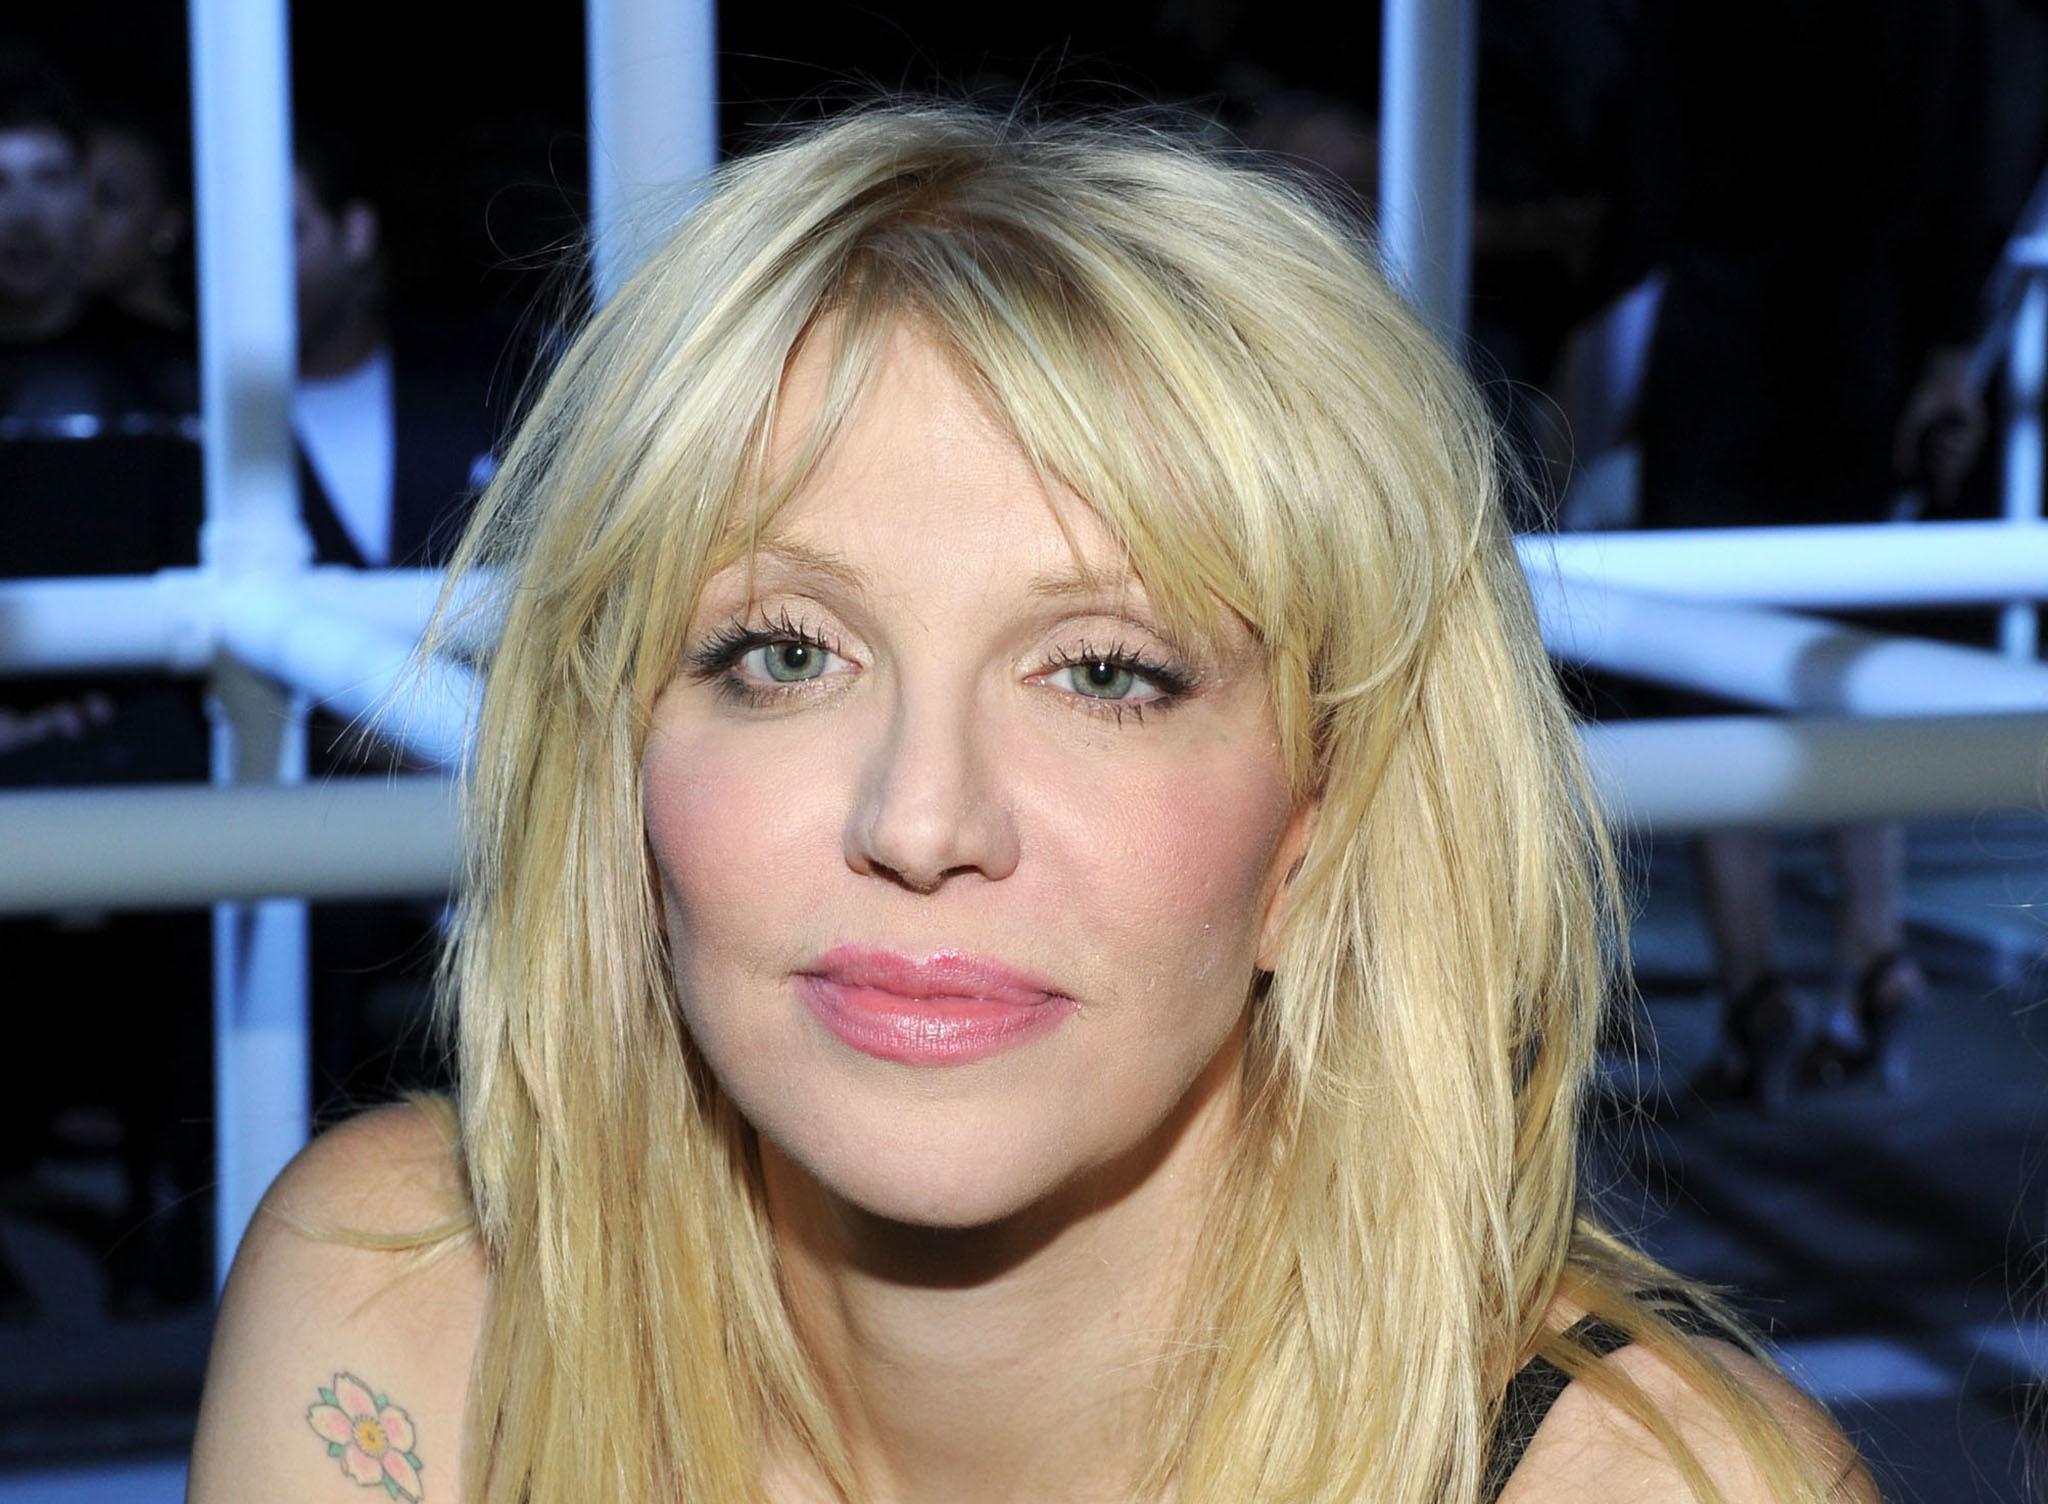 Courtney Love Free HD Wallpaper Image Background